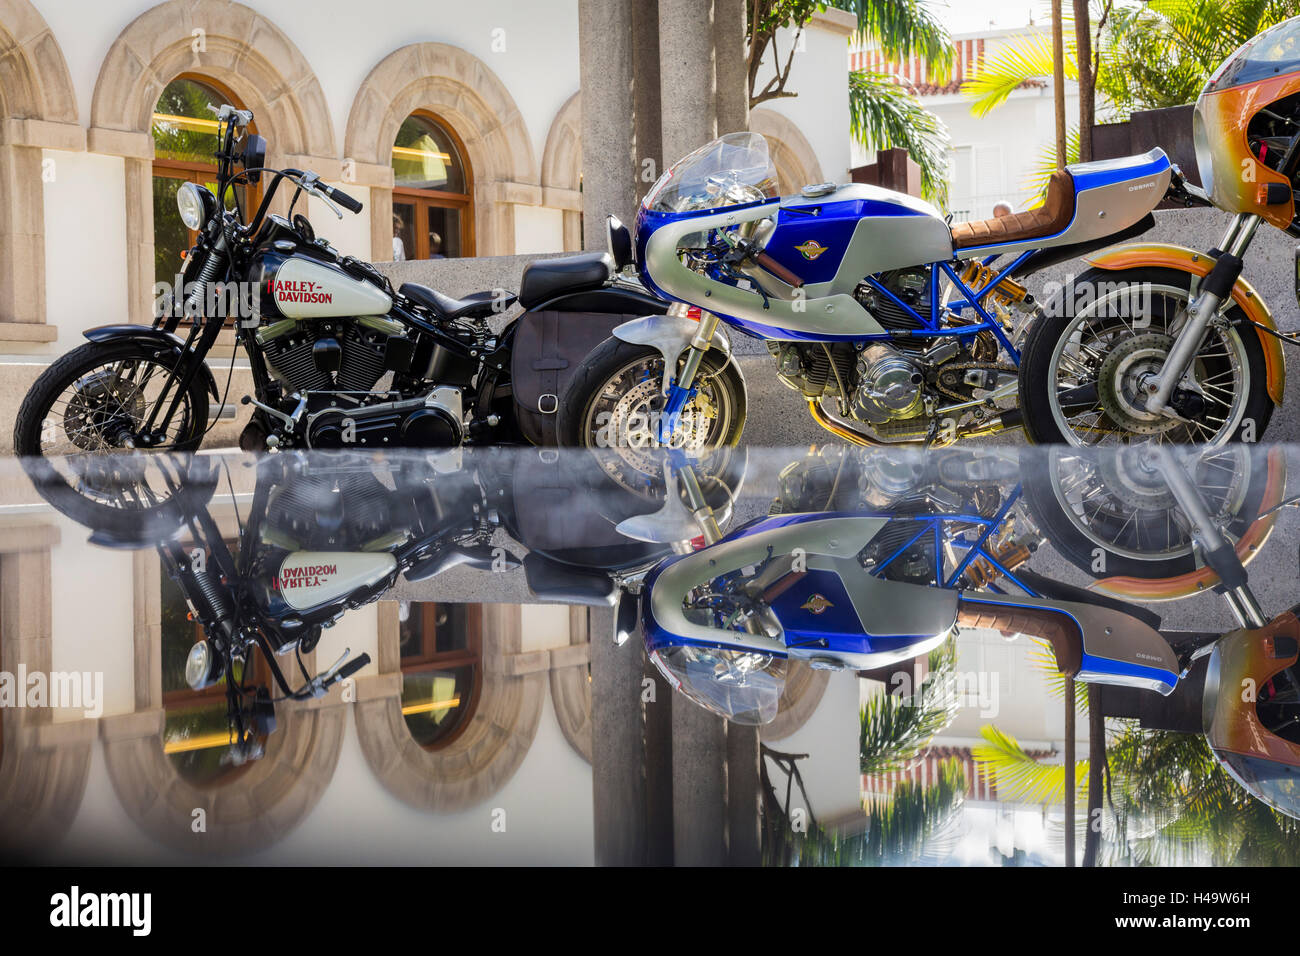 Harley Davidson and ducati desmo reflected in a glass table top at the Mencey Hotel in Santa Cruz de Tenerife for the start of the Queens Cavalcade event, during which 91 motorcycles will spend 4 days completing various routes throughout the Canary Islands. Stock Photo